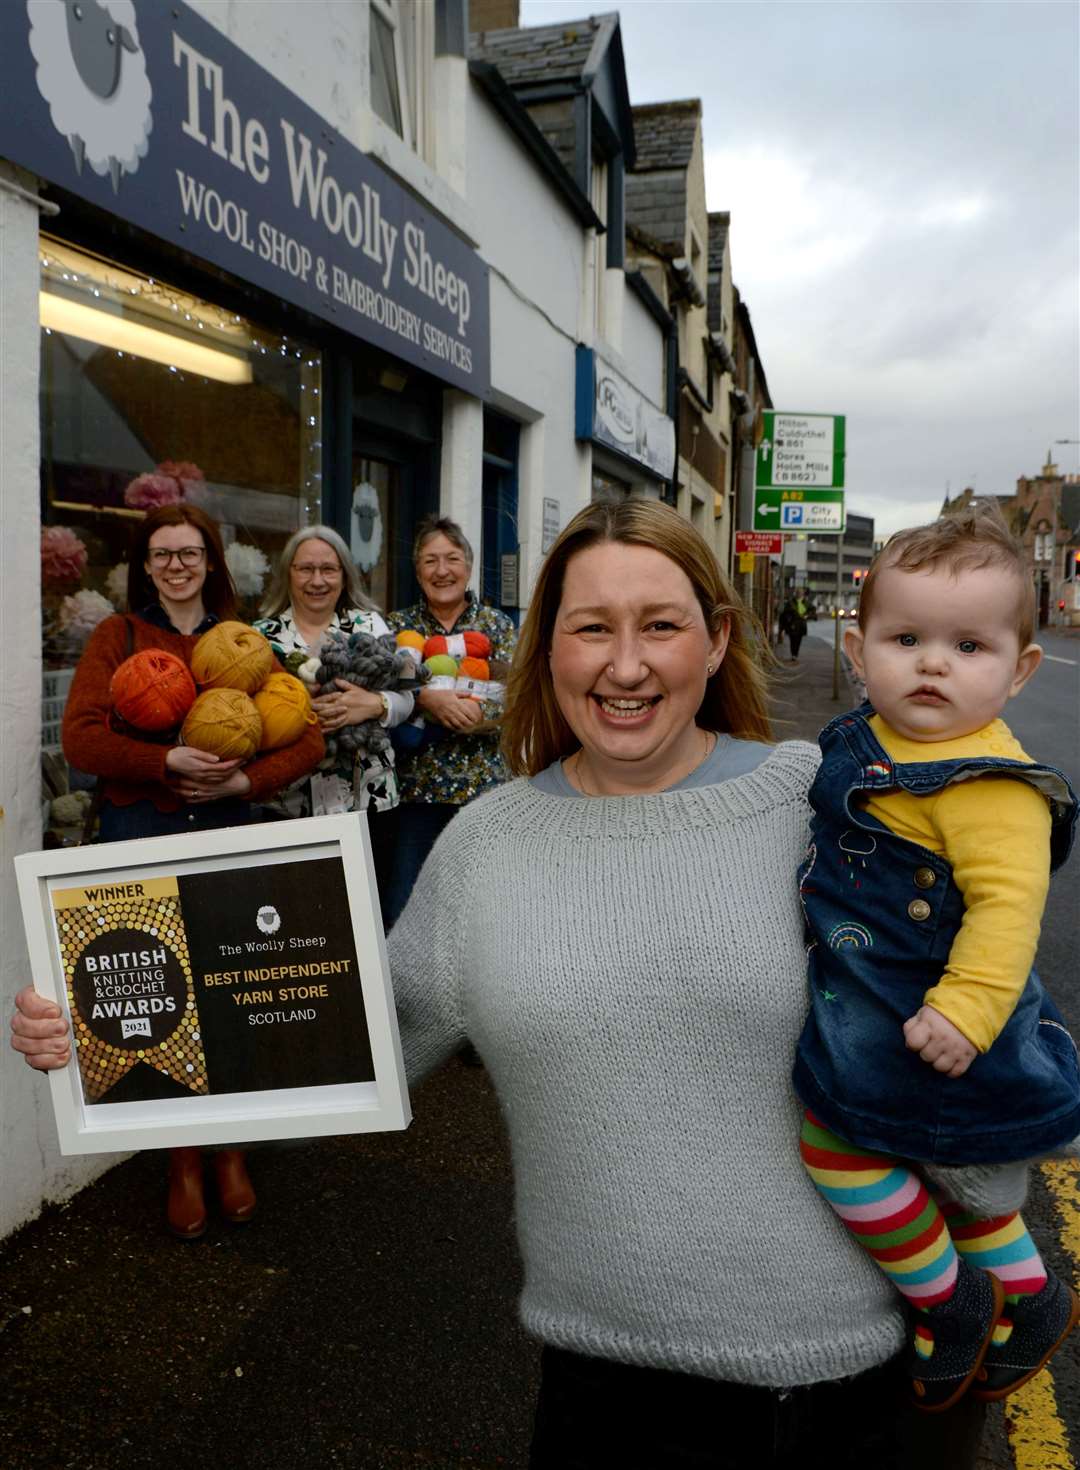 The Woolly Sheep owner Naomi Whyte and daughter Ruby Rae Edwards proudly display the shop's best independent yarn store in Scotland award from the British Knitting & Crochet Awards 2021 watched by Mary-Anne Thomson, Pearl Whyte and Andrea Gritter. Picture: James Mackenzie